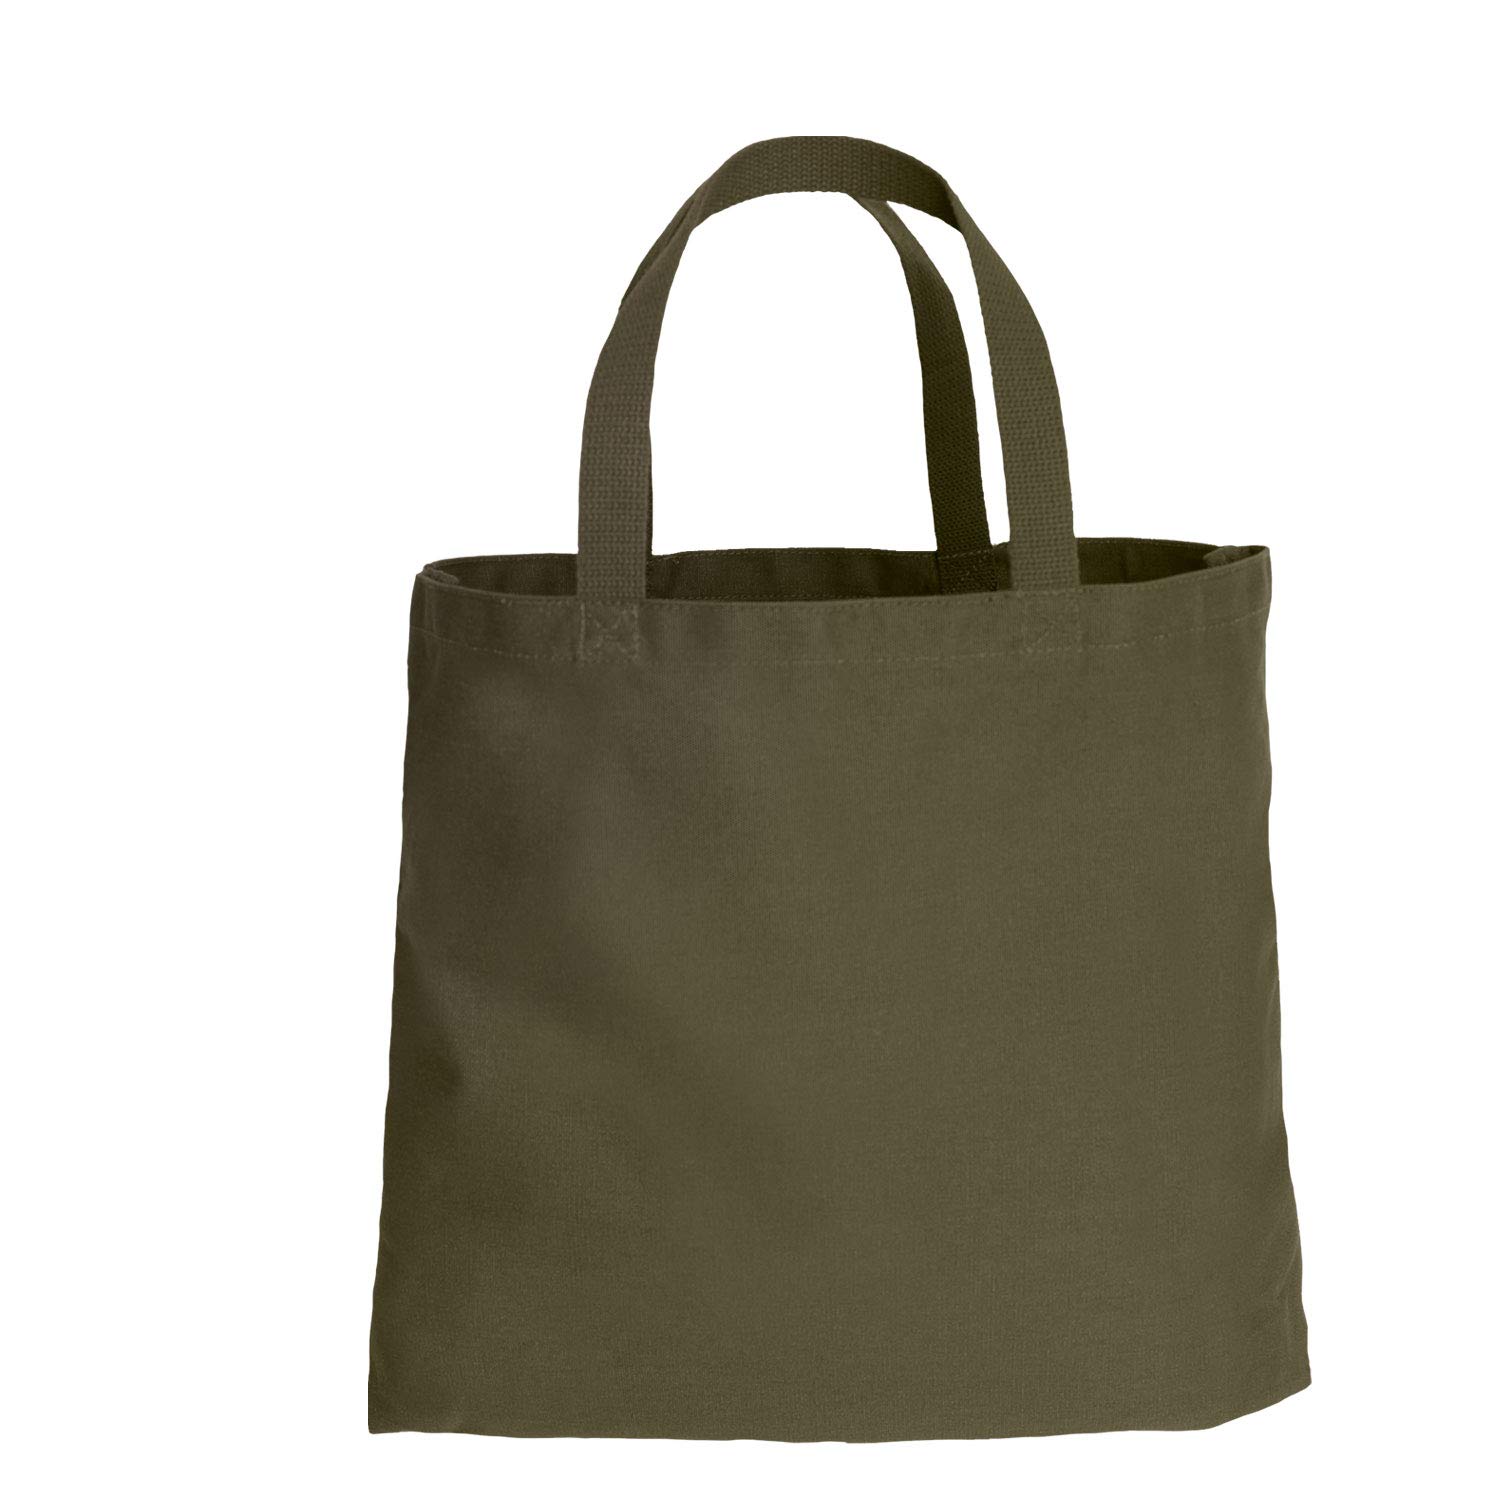 Rothco 18647 Canvas Camo and Solid Tote Bag Color : Olive Drab